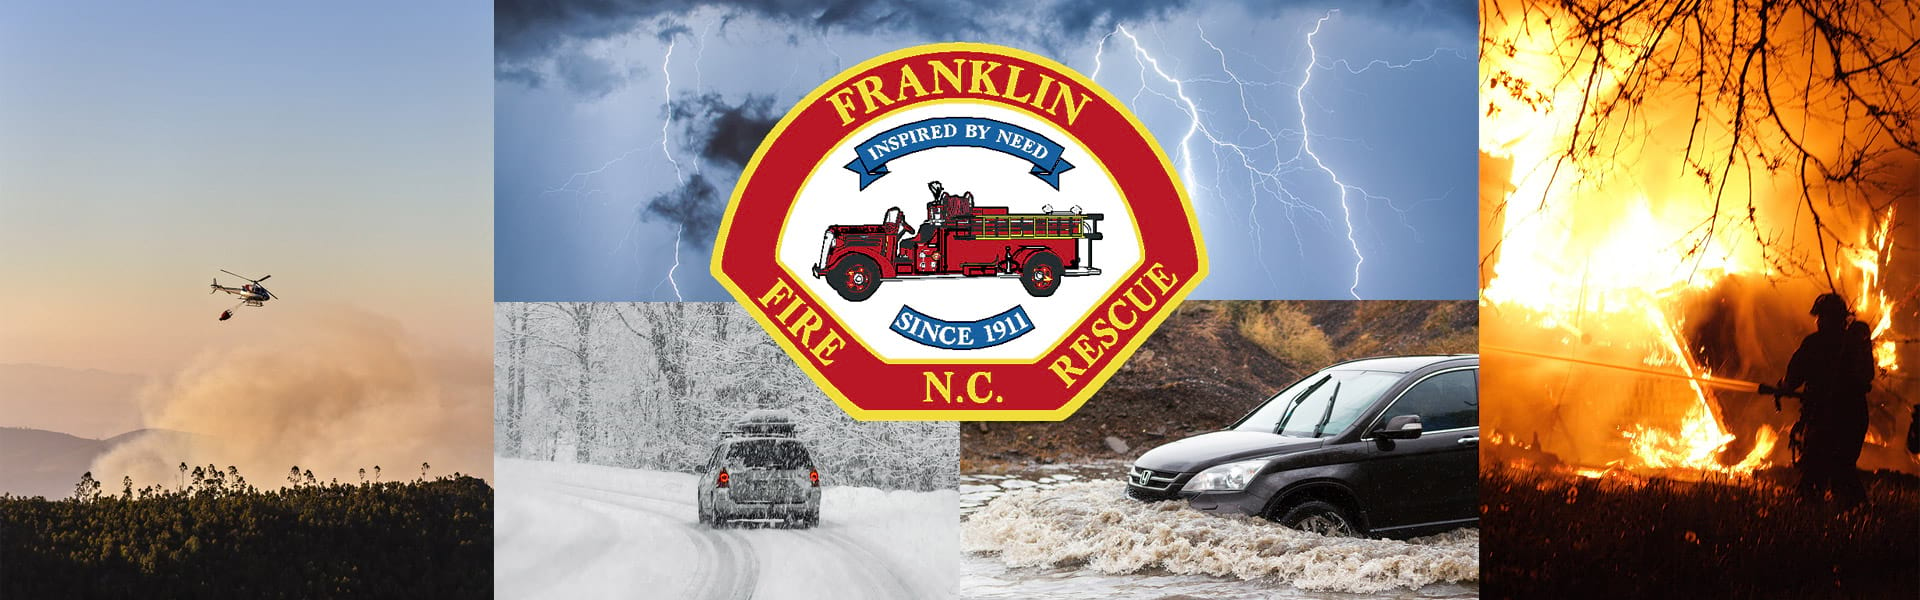 Public Safety Information Franklin Fire Rescue